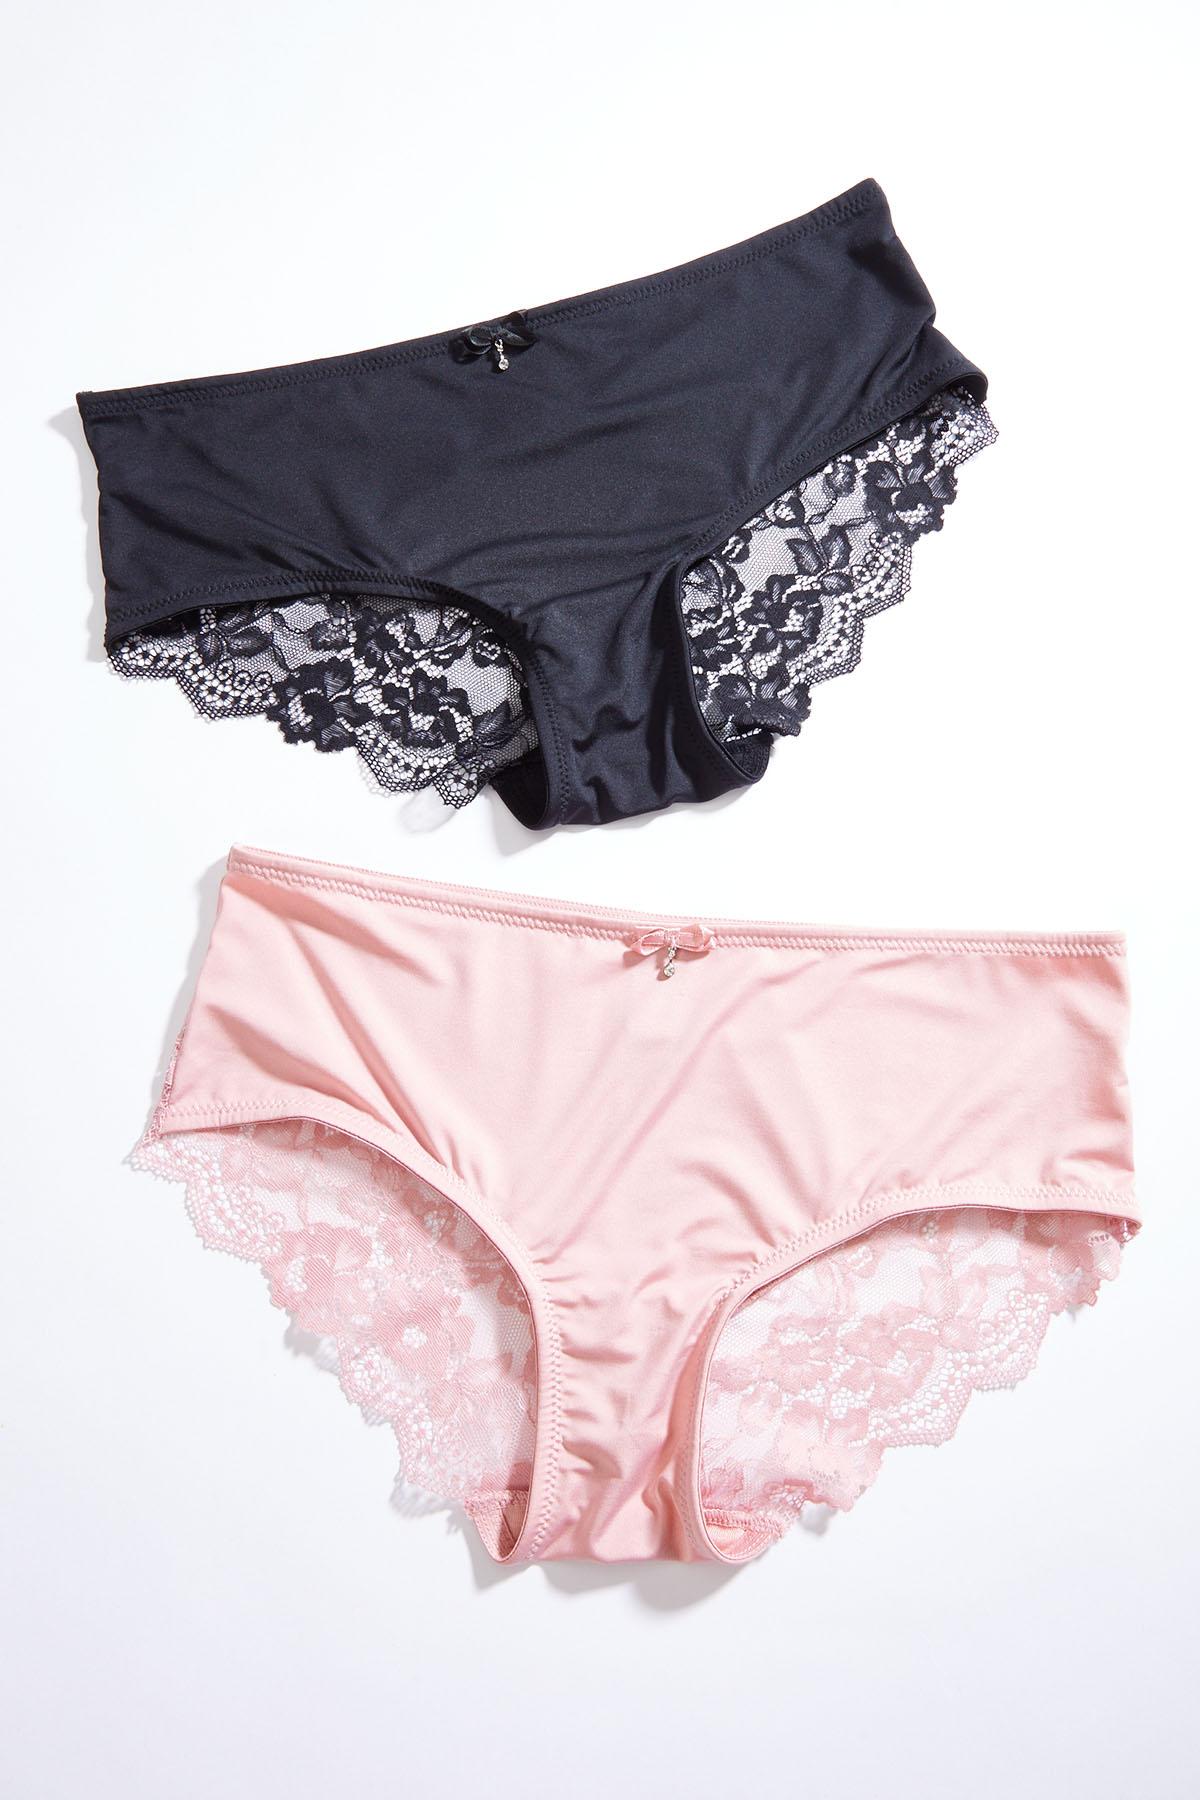 Cato Fashions  Cato Lace Back Hipster Panty Set